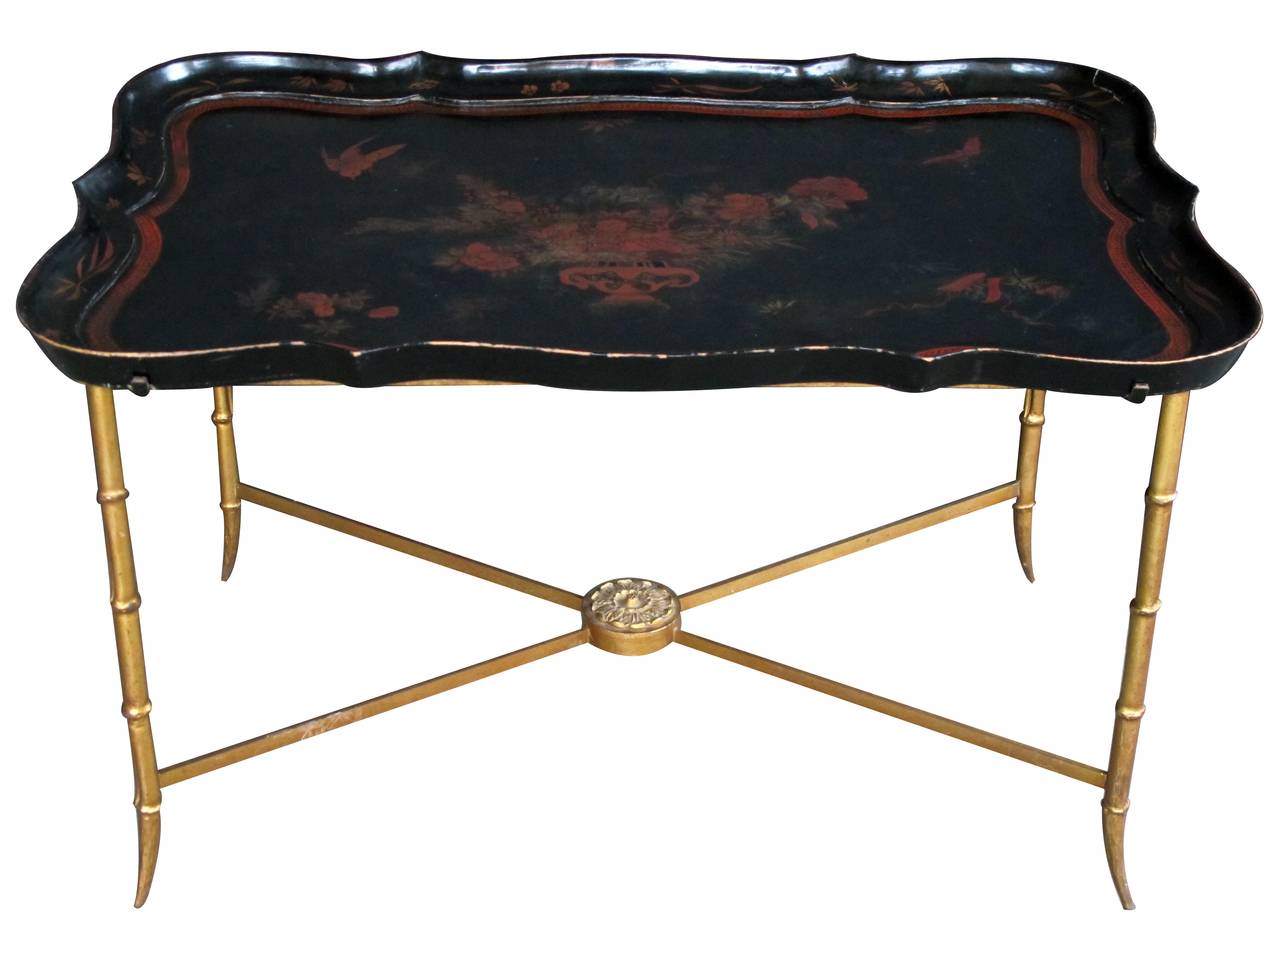 Elegant French 1940s Tray Table by Maison Baguès, Paris In Excellent Condition For Sale In San Francisco, CA